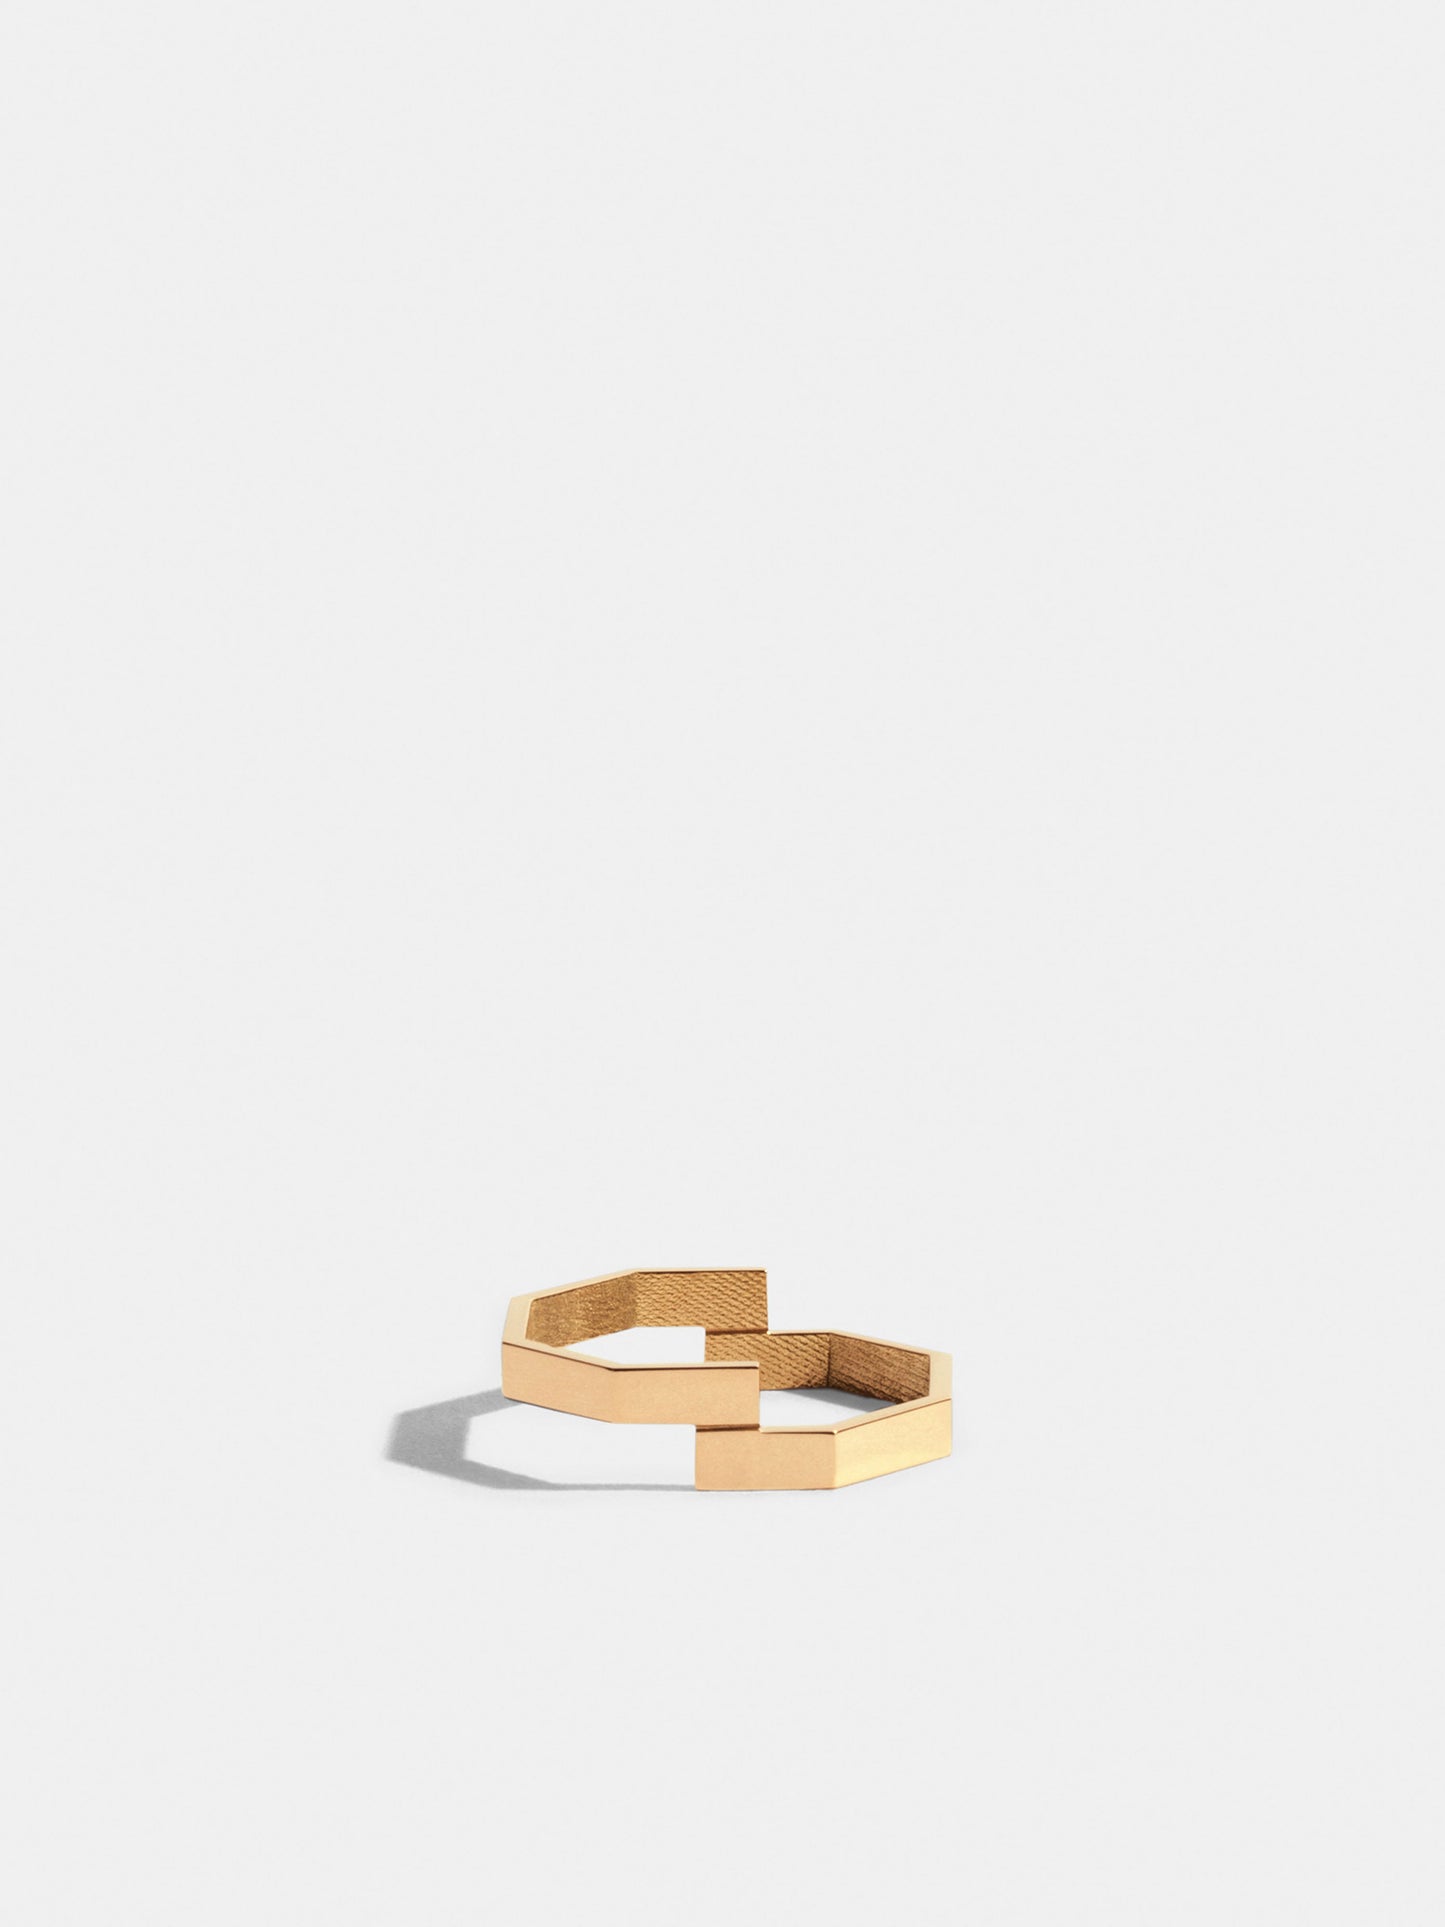 Fairer Ring: Octagon Ring 'double' in Gelbgold, liegend